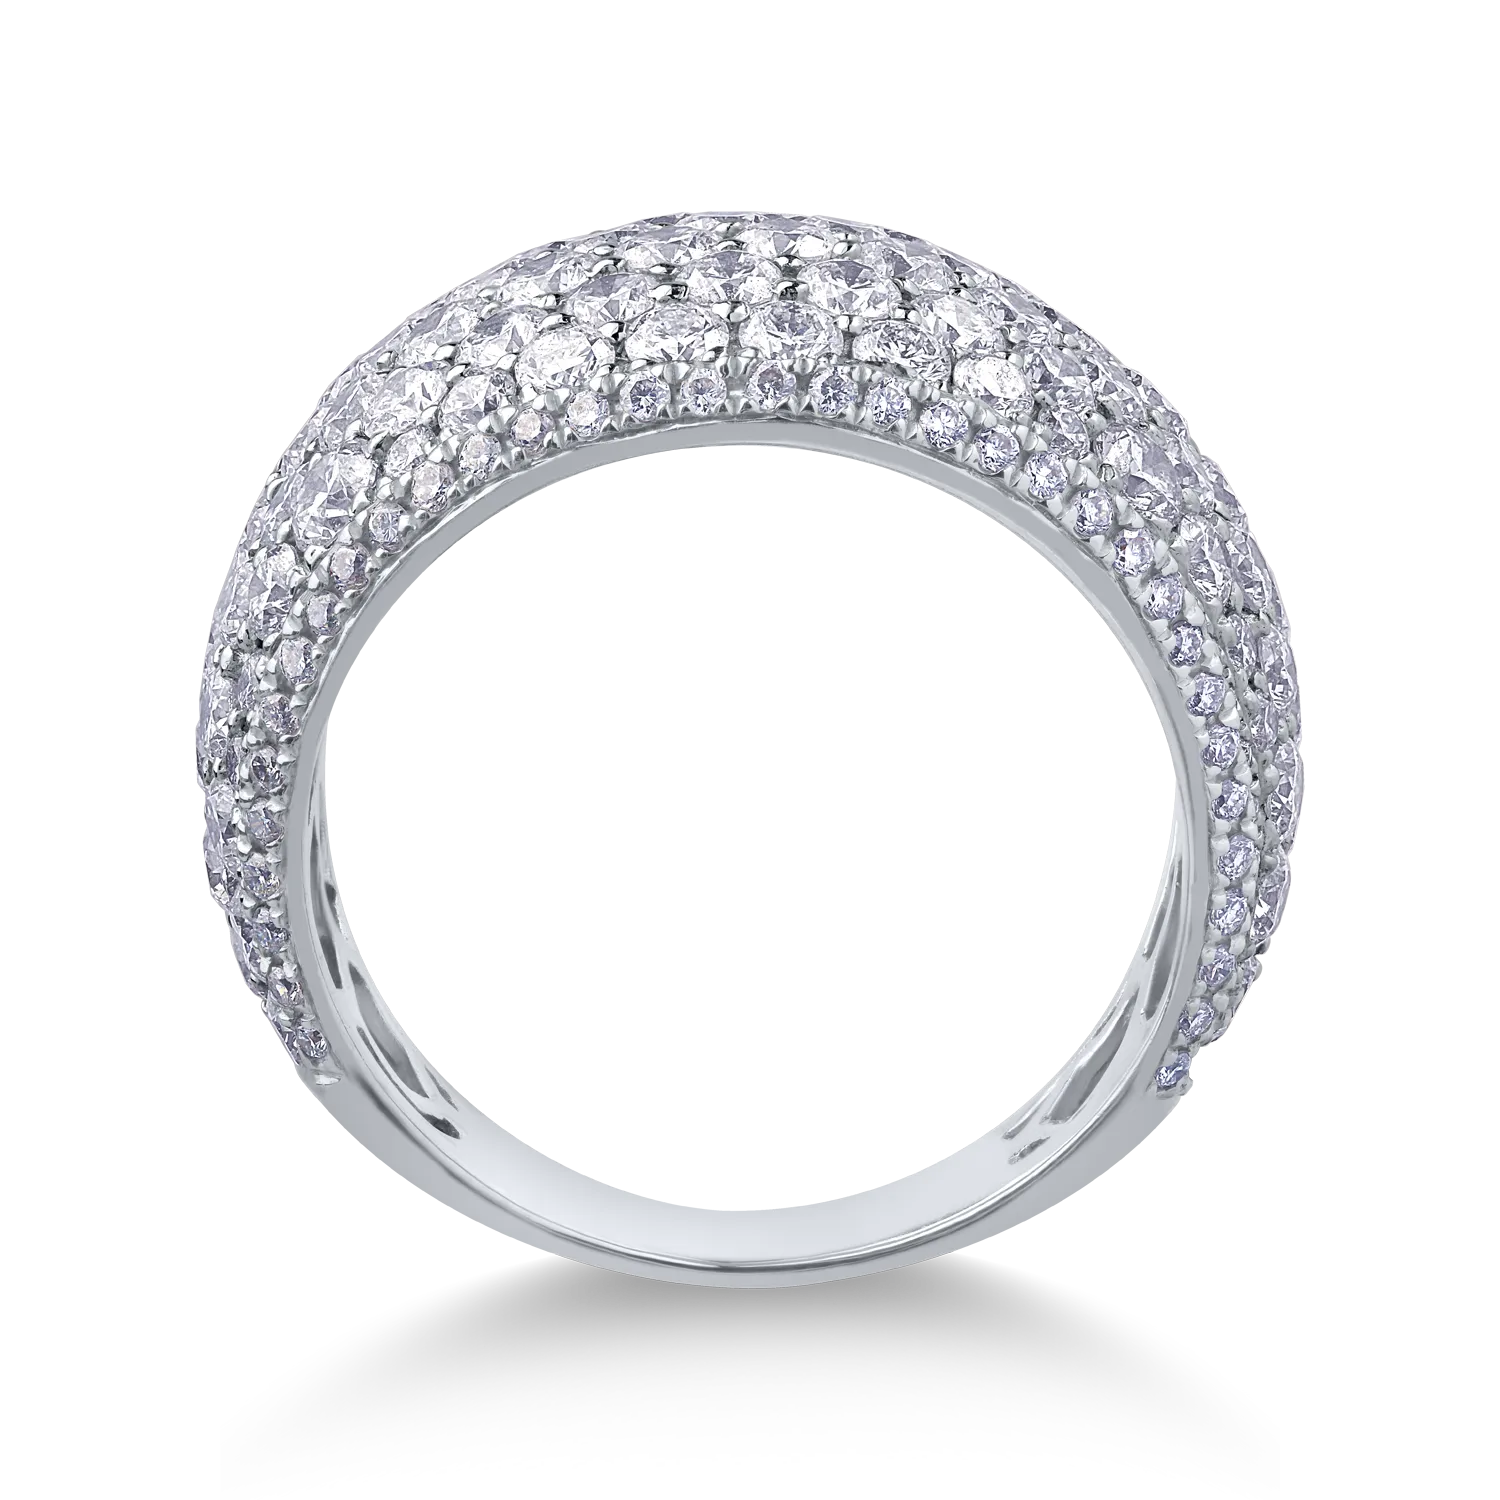 18K white gold ring with 4.23ct diamonds